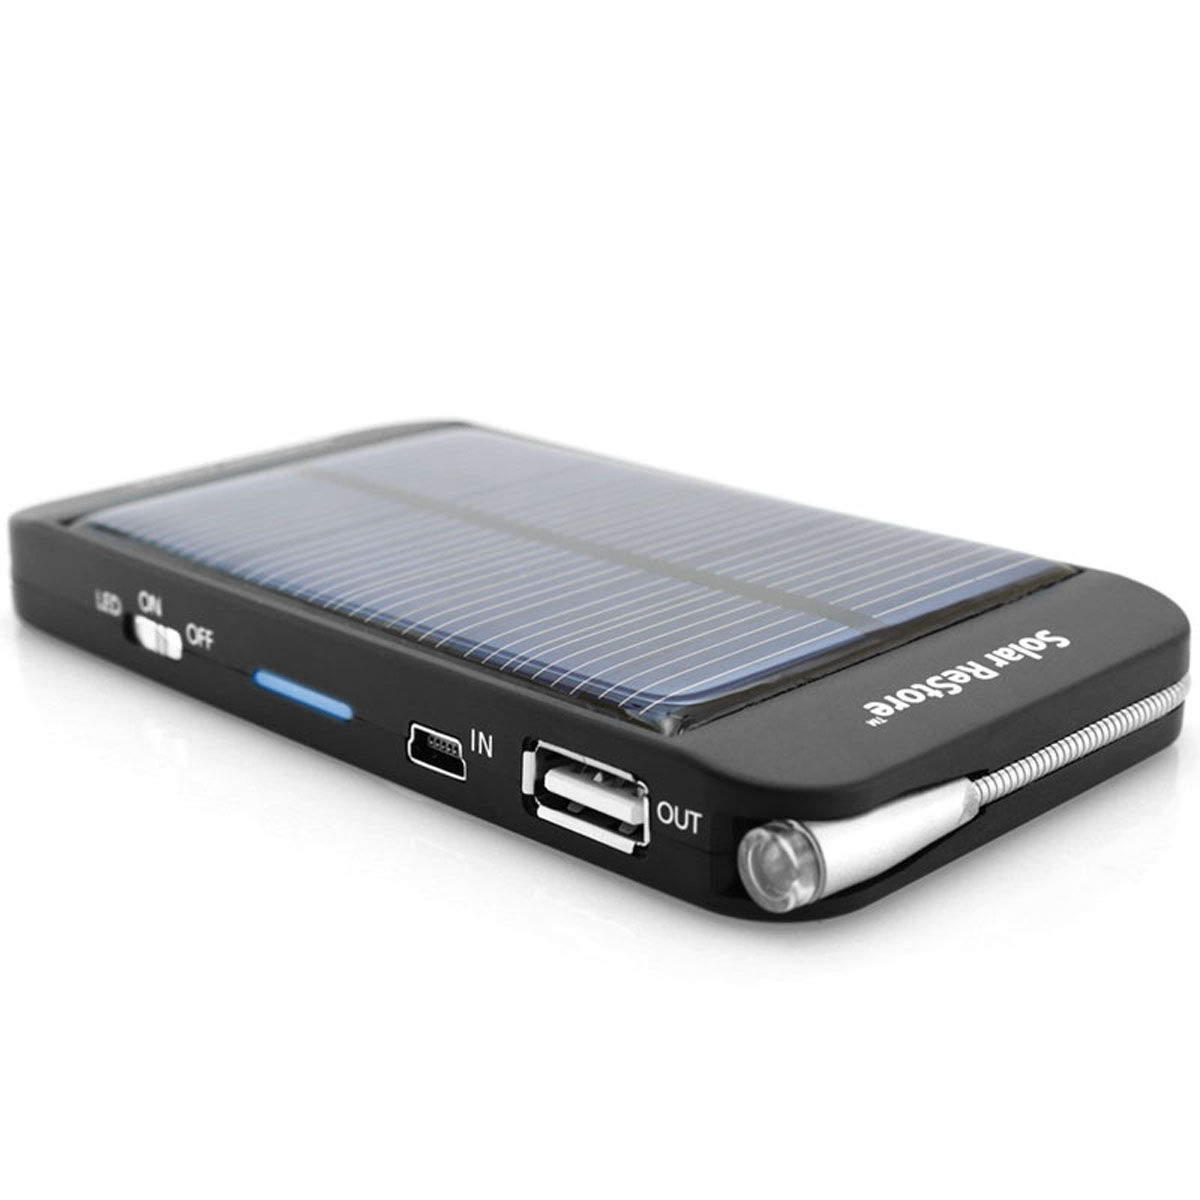 ReVIVE Solar ReStore Solar Charger and External Battery Pack with ...